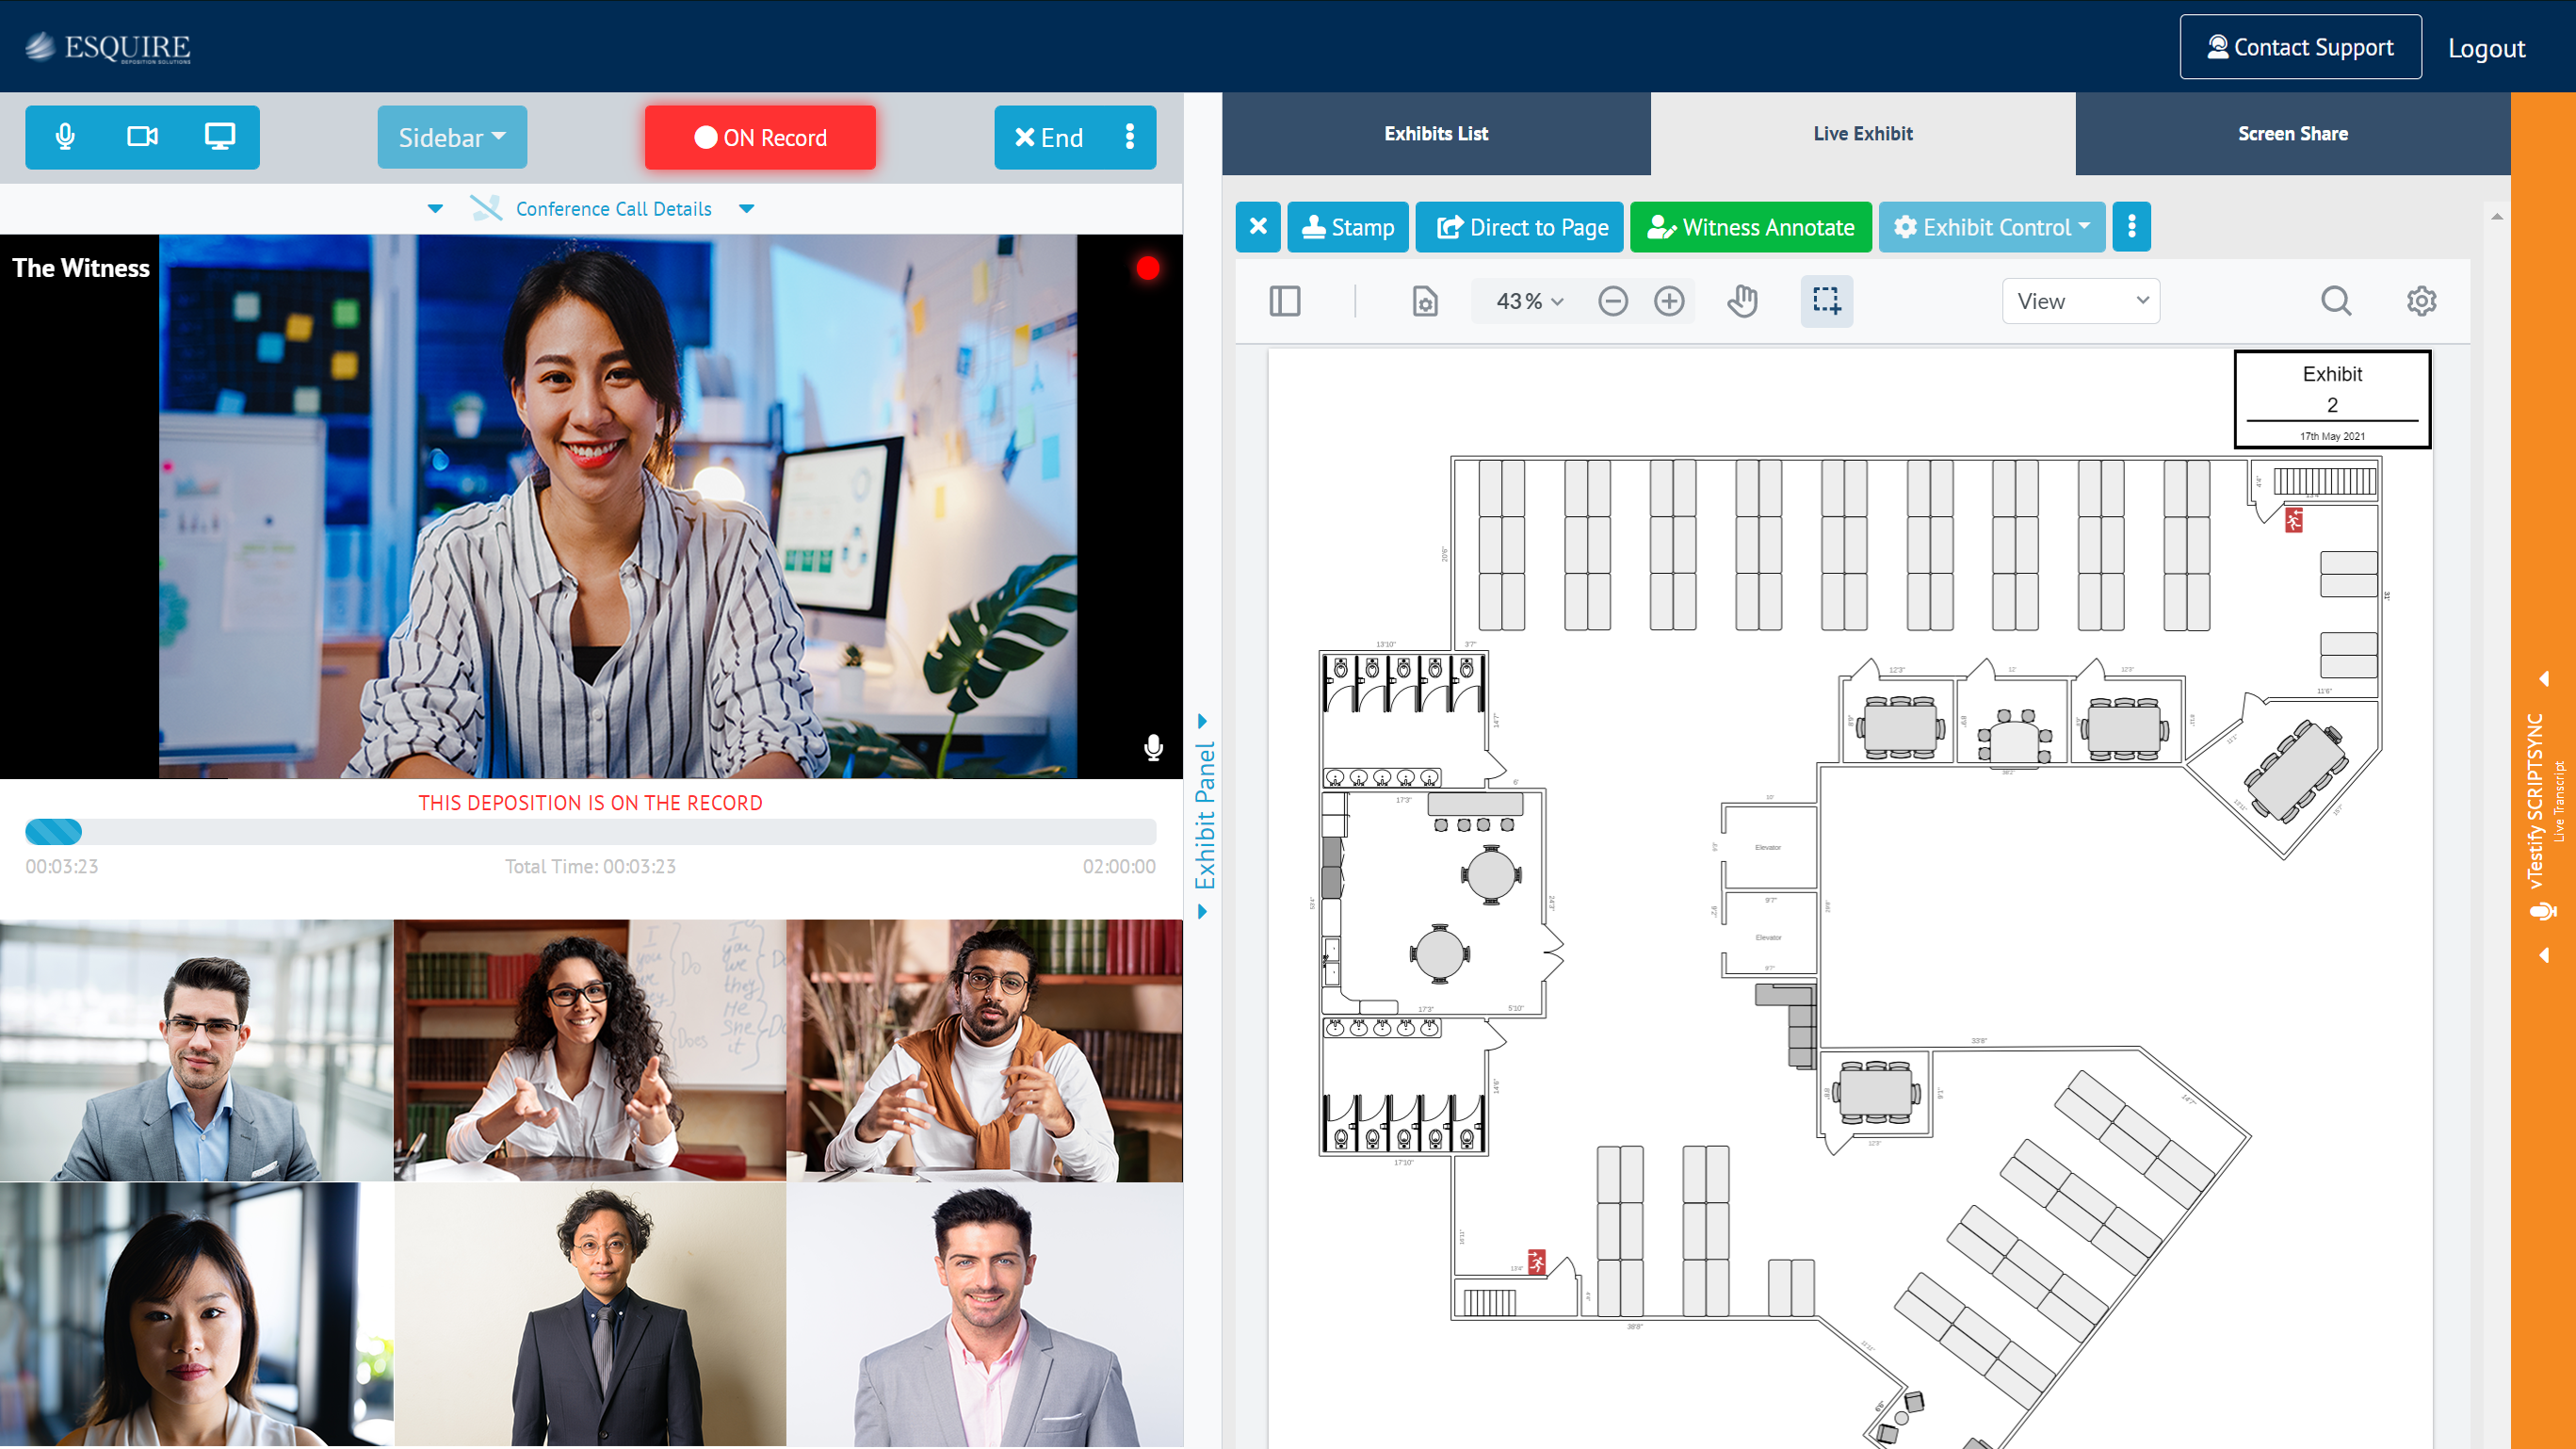 From Court Reporting to Video to Exhibits, An All-in-One Virtual Deposition Solution Launches